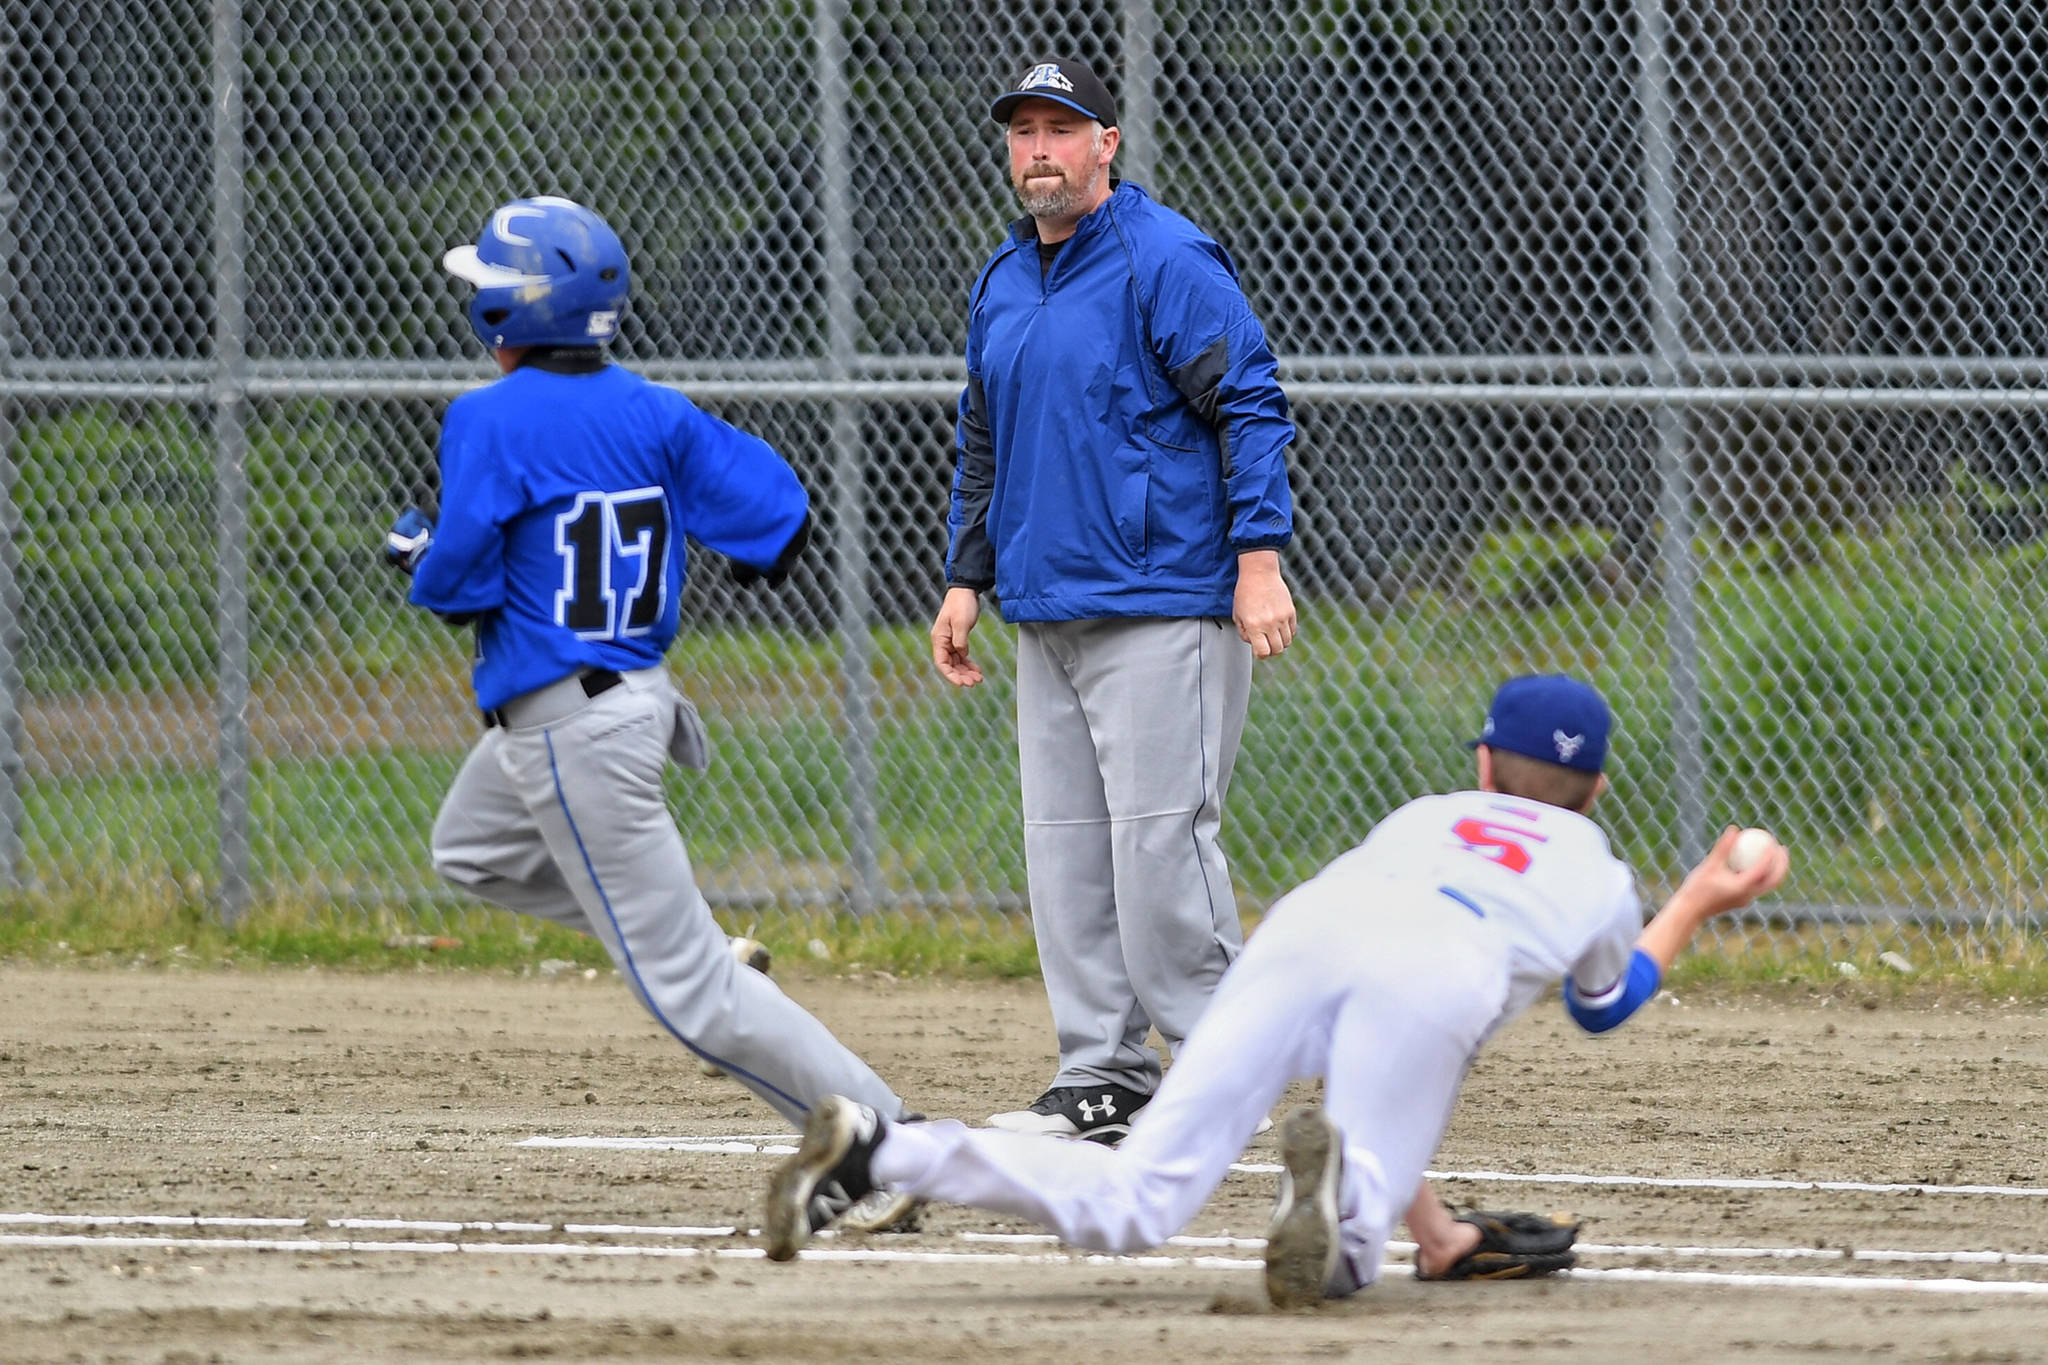 Thunder Mountain’s Assistant Coach Jake Carte watches as Isaiah Nelson, left, outruns the throw by Sitka’s pitcher Cole Riggs during the Region V Baseball Championship at Adair-Kennedy Memorial Park on Friday, May 24, 2019. (Michael Penn | Juneau Empire)